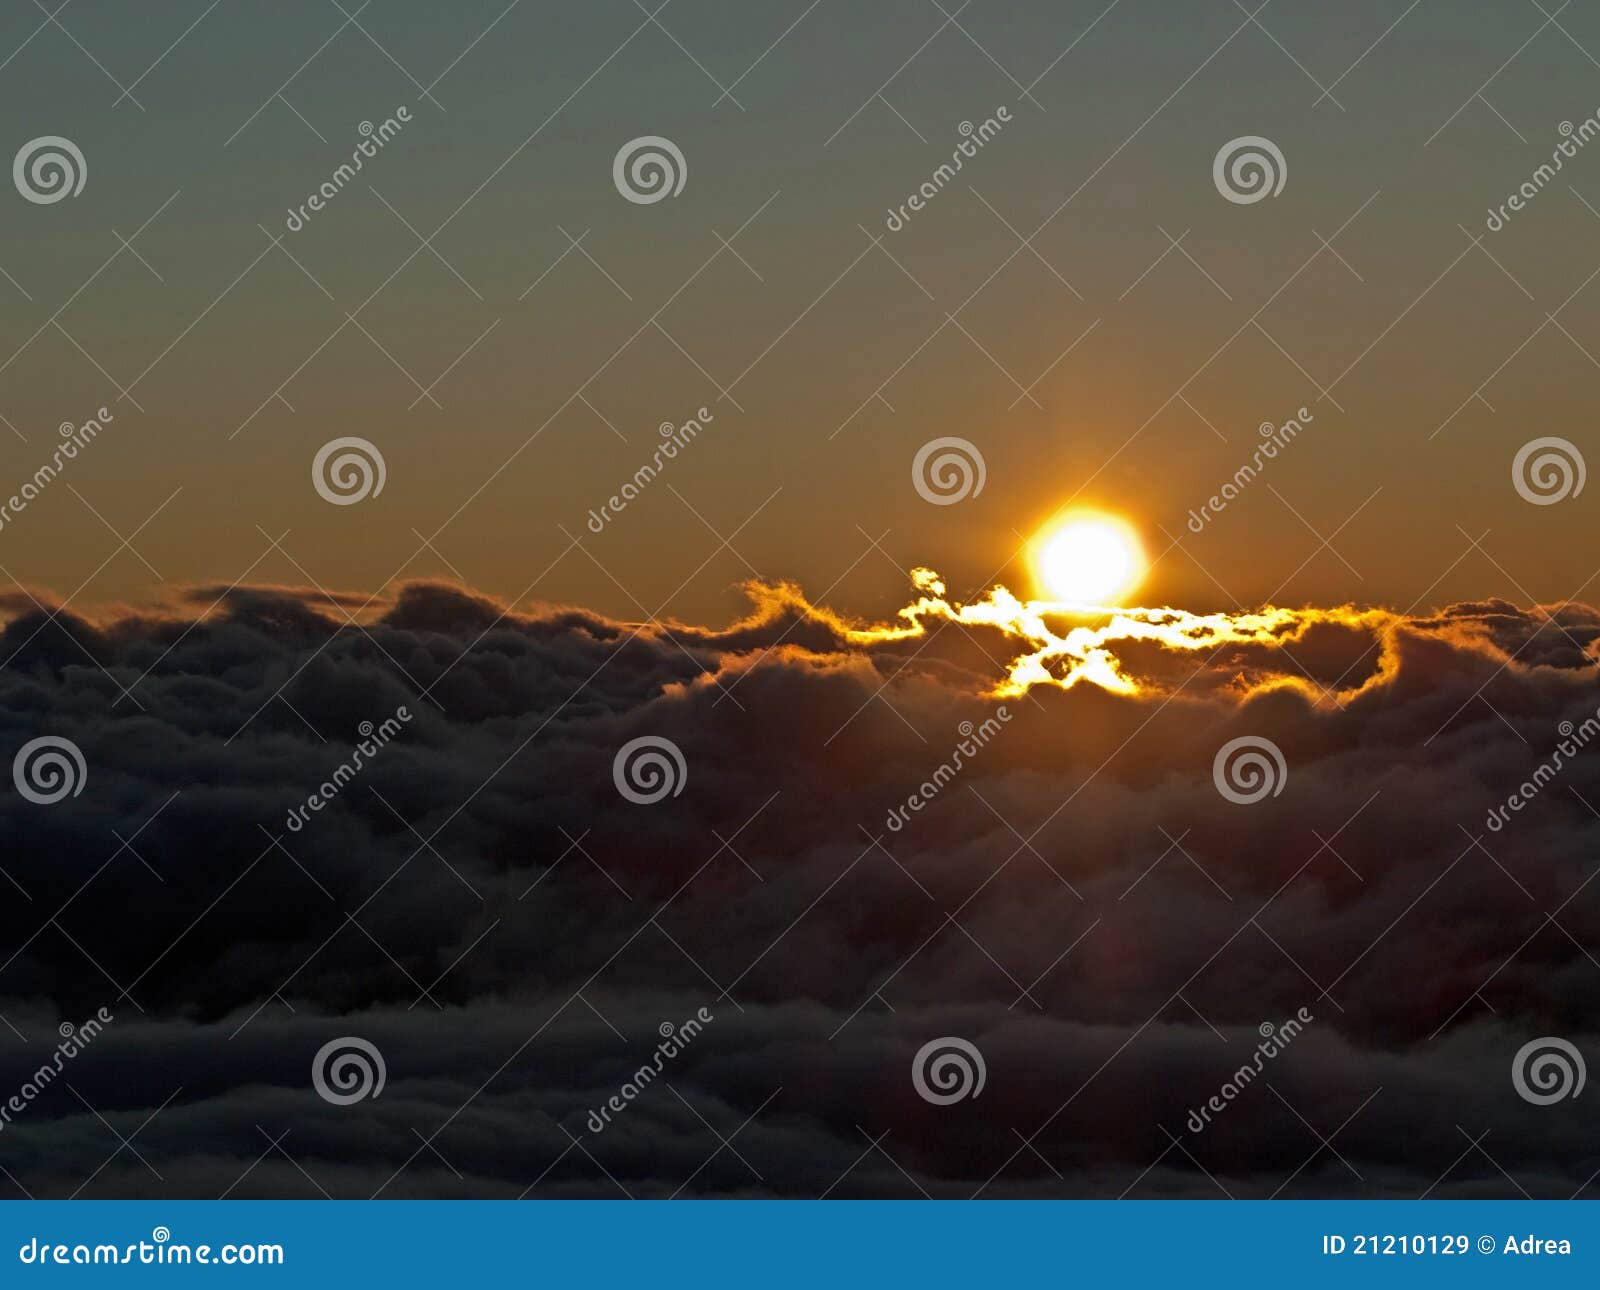 sunrise or sunset view at high altitude